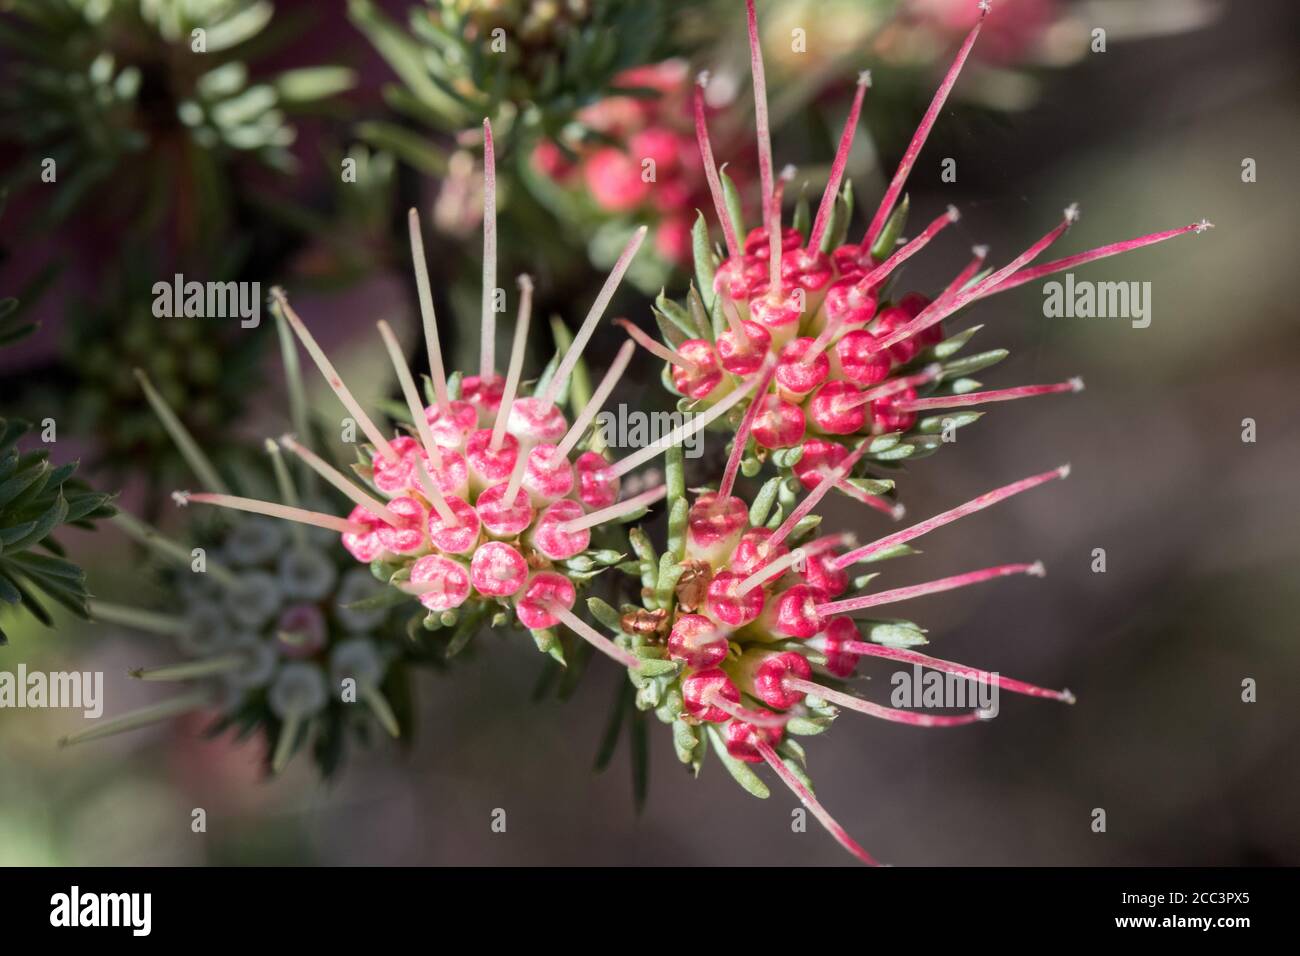 Clustered Scent Myrtle plant in flower Stock Photo